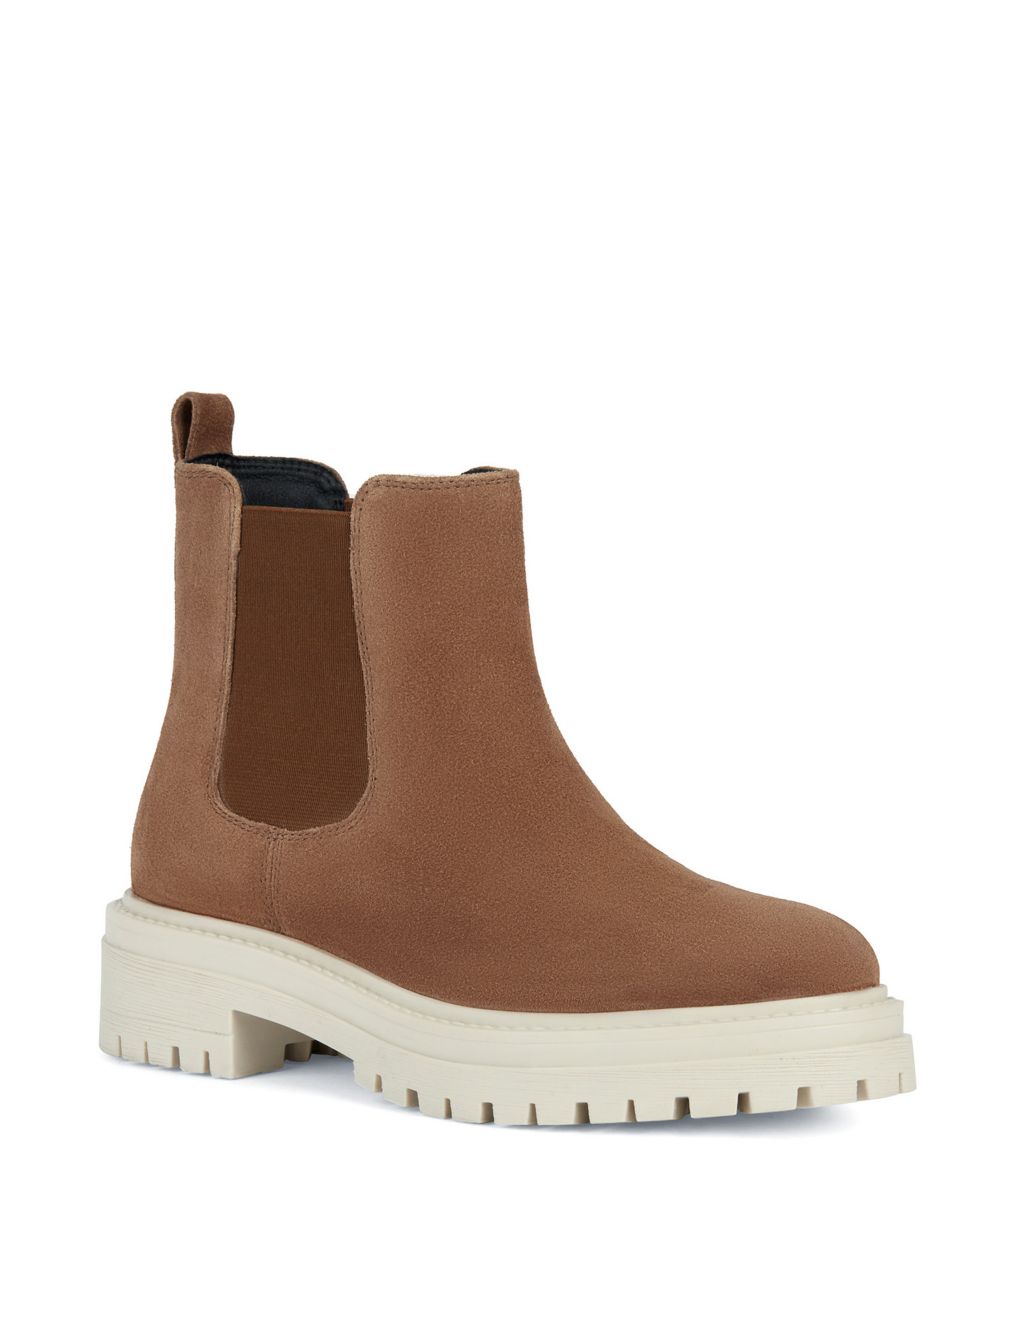 Suede Chelsea Cleated Ankle Boots image 2